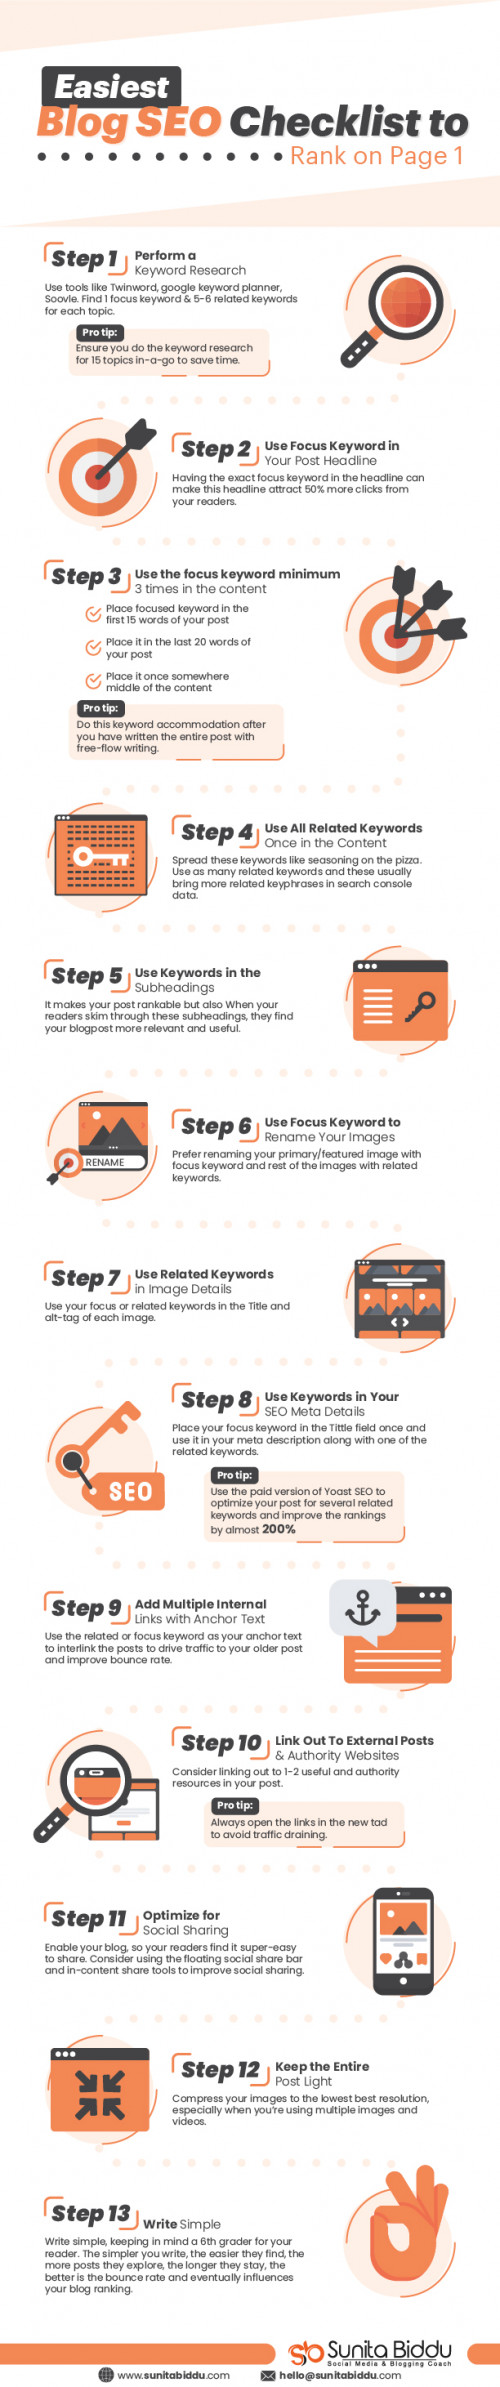 Rank-Your-Blog-Fast-on-Page-1-with-Blog-SEO-Checklist-Infographic.jpg